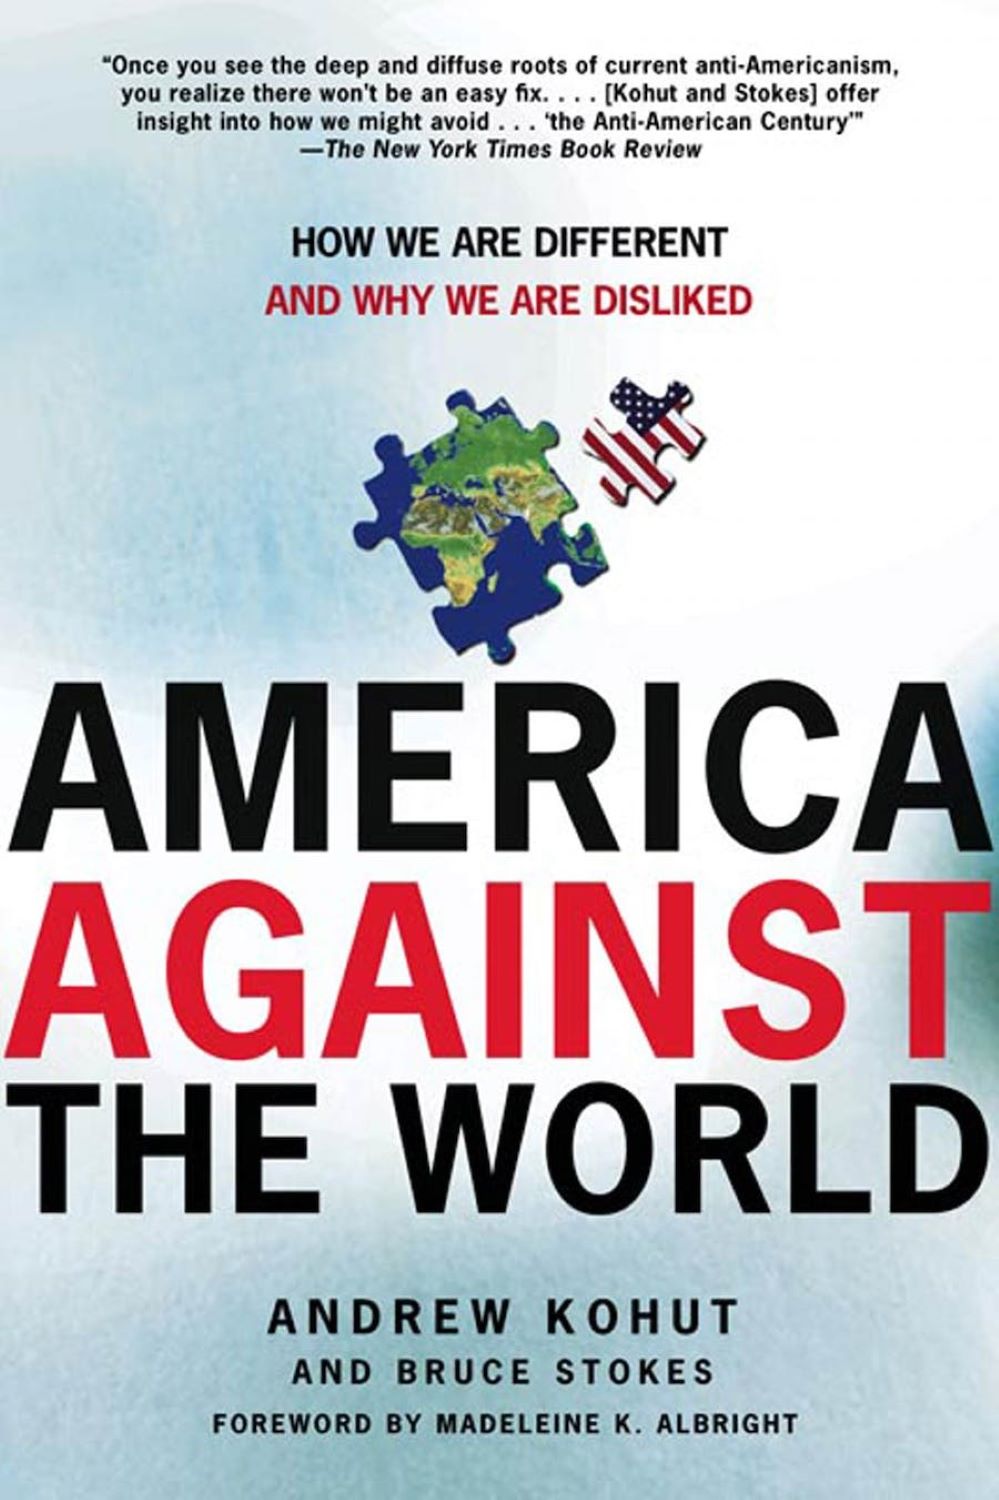 America Against the World by Andrew Kohut